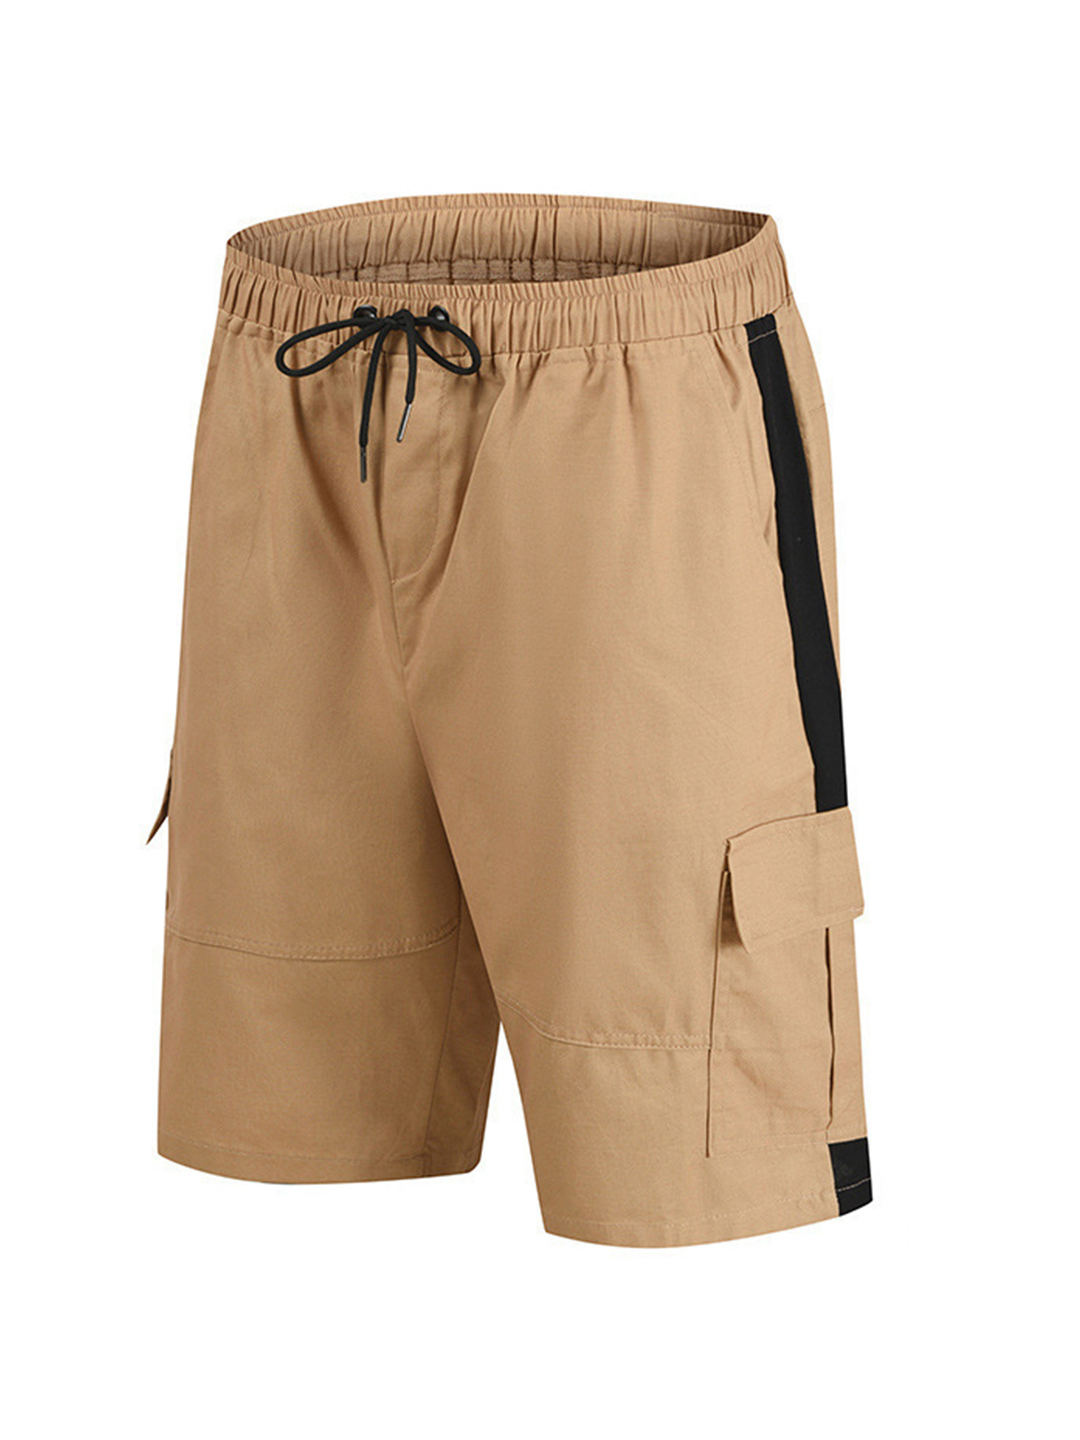 Men's Casual Rope Pulling Outdoor Shorts